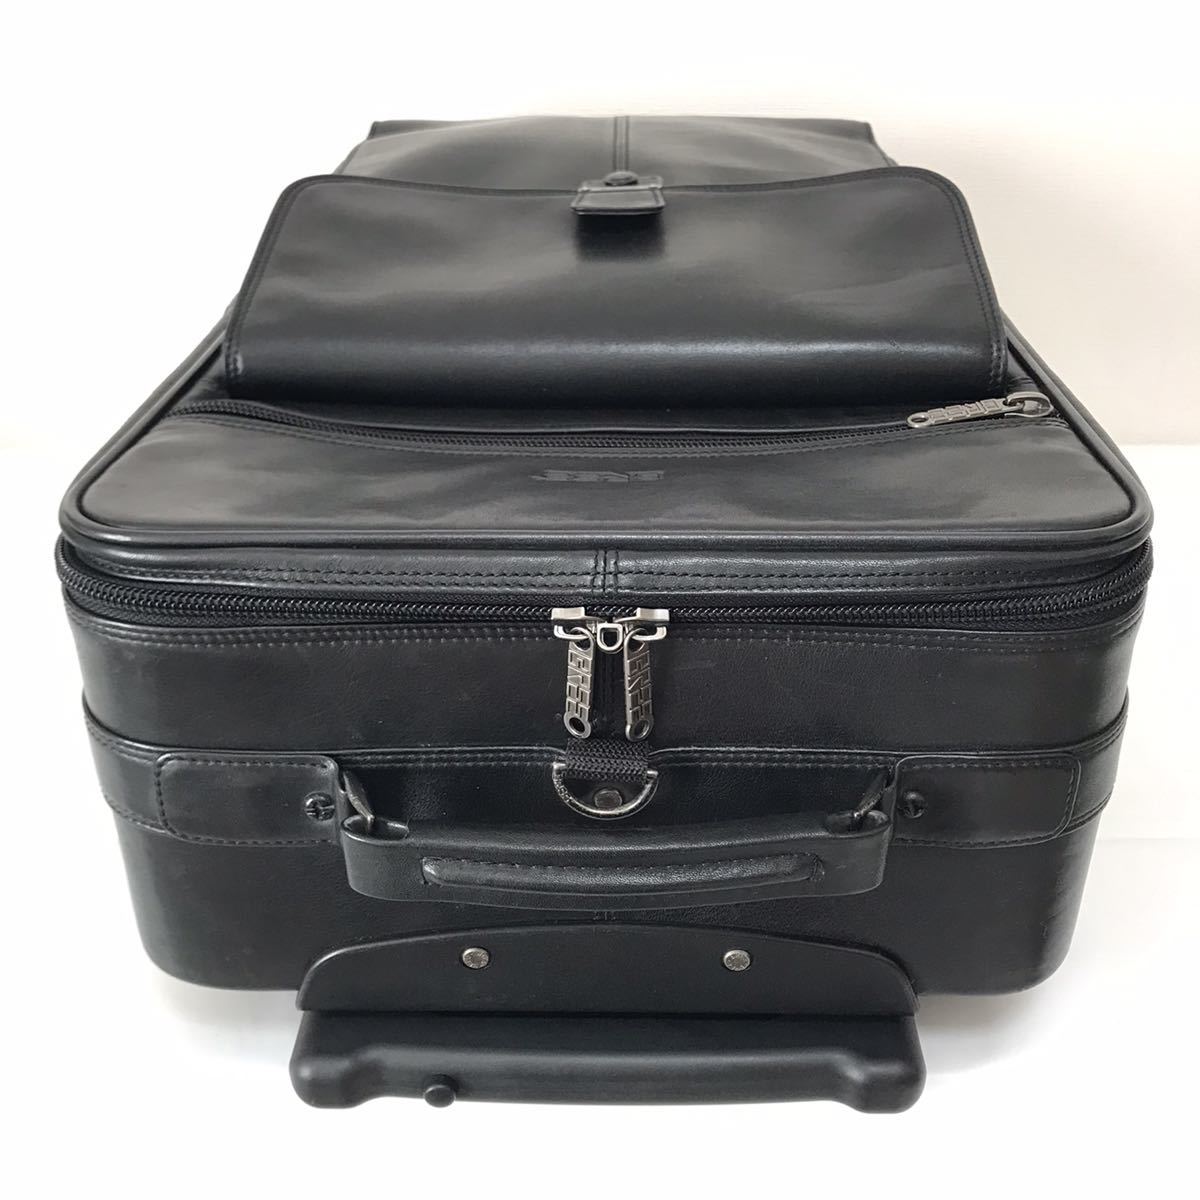  not yet sale in Japan! rare BREEb Lee * original leather all leather carry bag black black Carry case * traveling bag business trip bag with casters . Toro Lee men's *